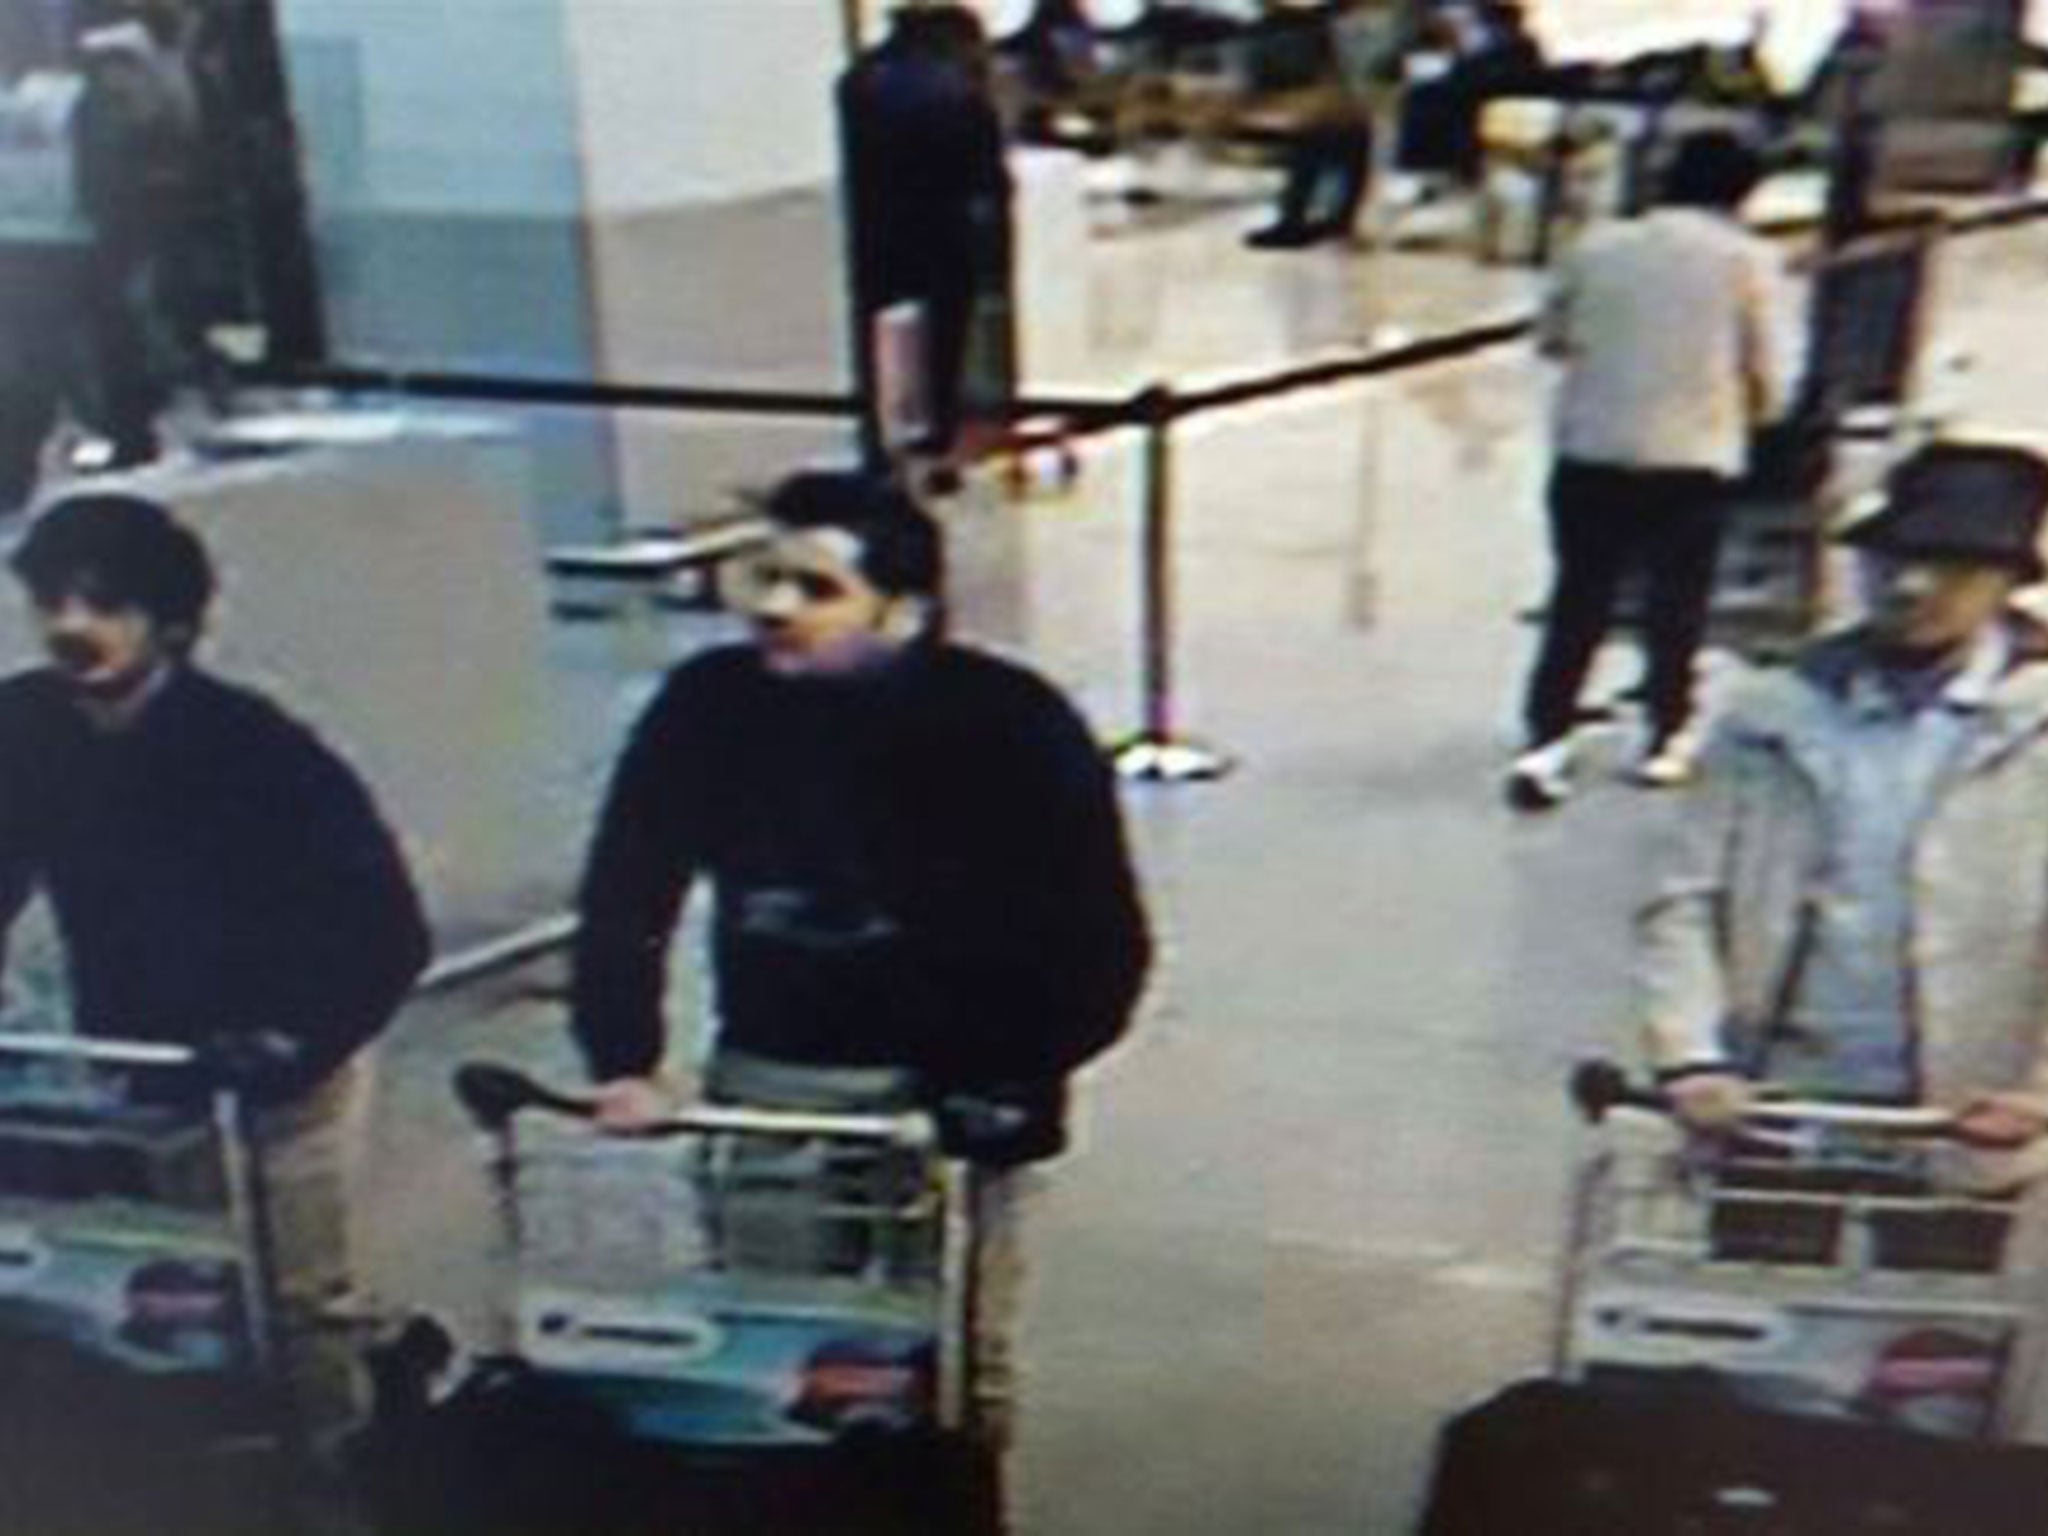 A picture released on March 22, 2016 by the belgian federal police on demand of the Federal prosecutor shows a screengrab of the airport CCTV camera showing three suspects of this morning's attacks at Brussels Airport, in Zaventem